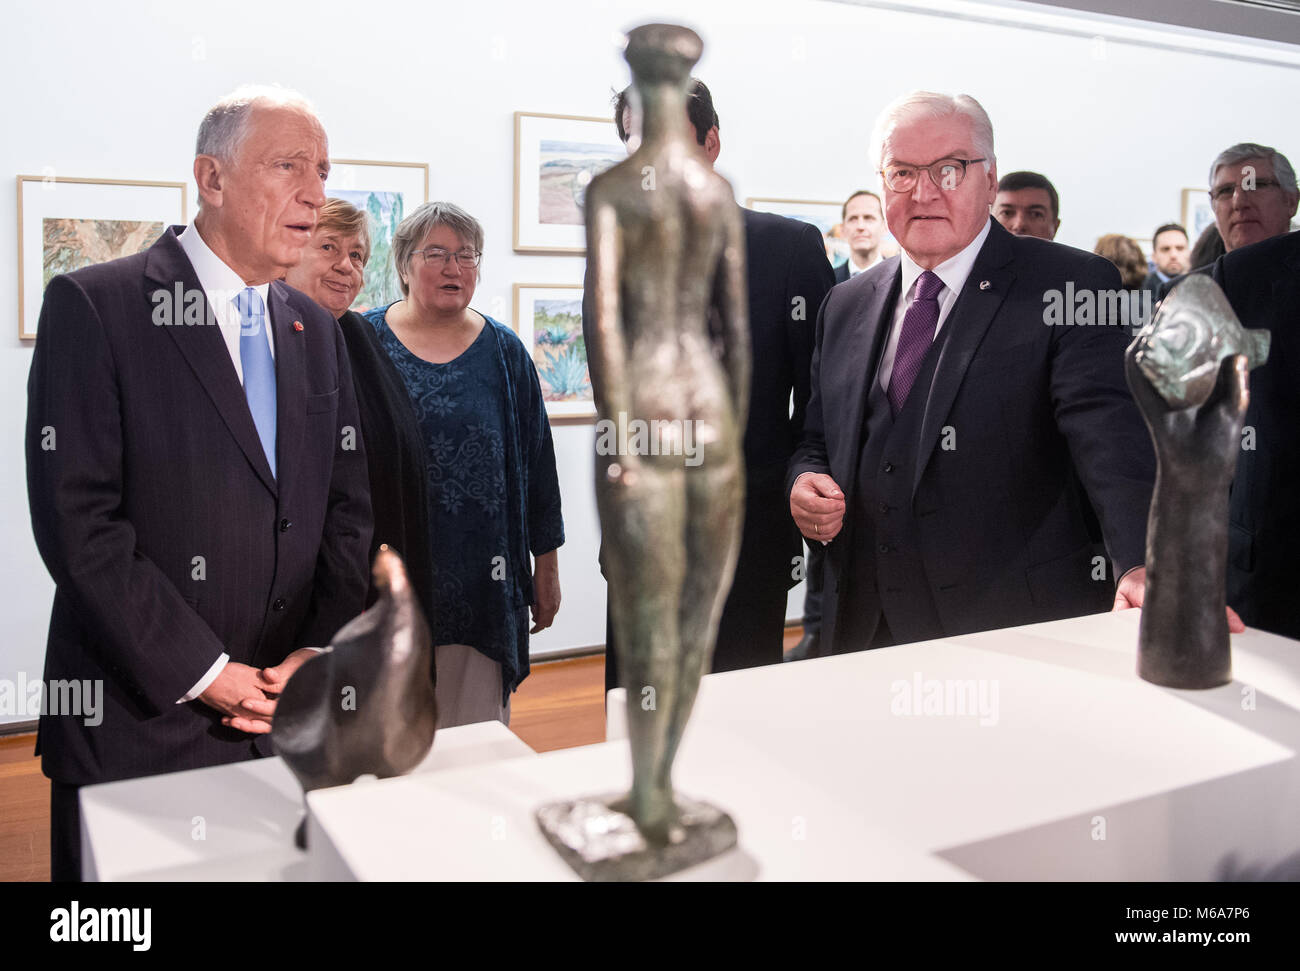 02 March 2018, Portugal, Porto: German President Frank-Walter Steinmeier (R) and President of Portugal, Marcelo Rebelo de Sousa, visit the Guenter Grass exhibition 'Begegnungen' (lit. encounters) at the Museum Casa Museu Guerra Junqueiro. German President Steinmeier is in Portugal for a two-day visit. Photo: Bernd von Jutrczenka/dpa Stock Photo